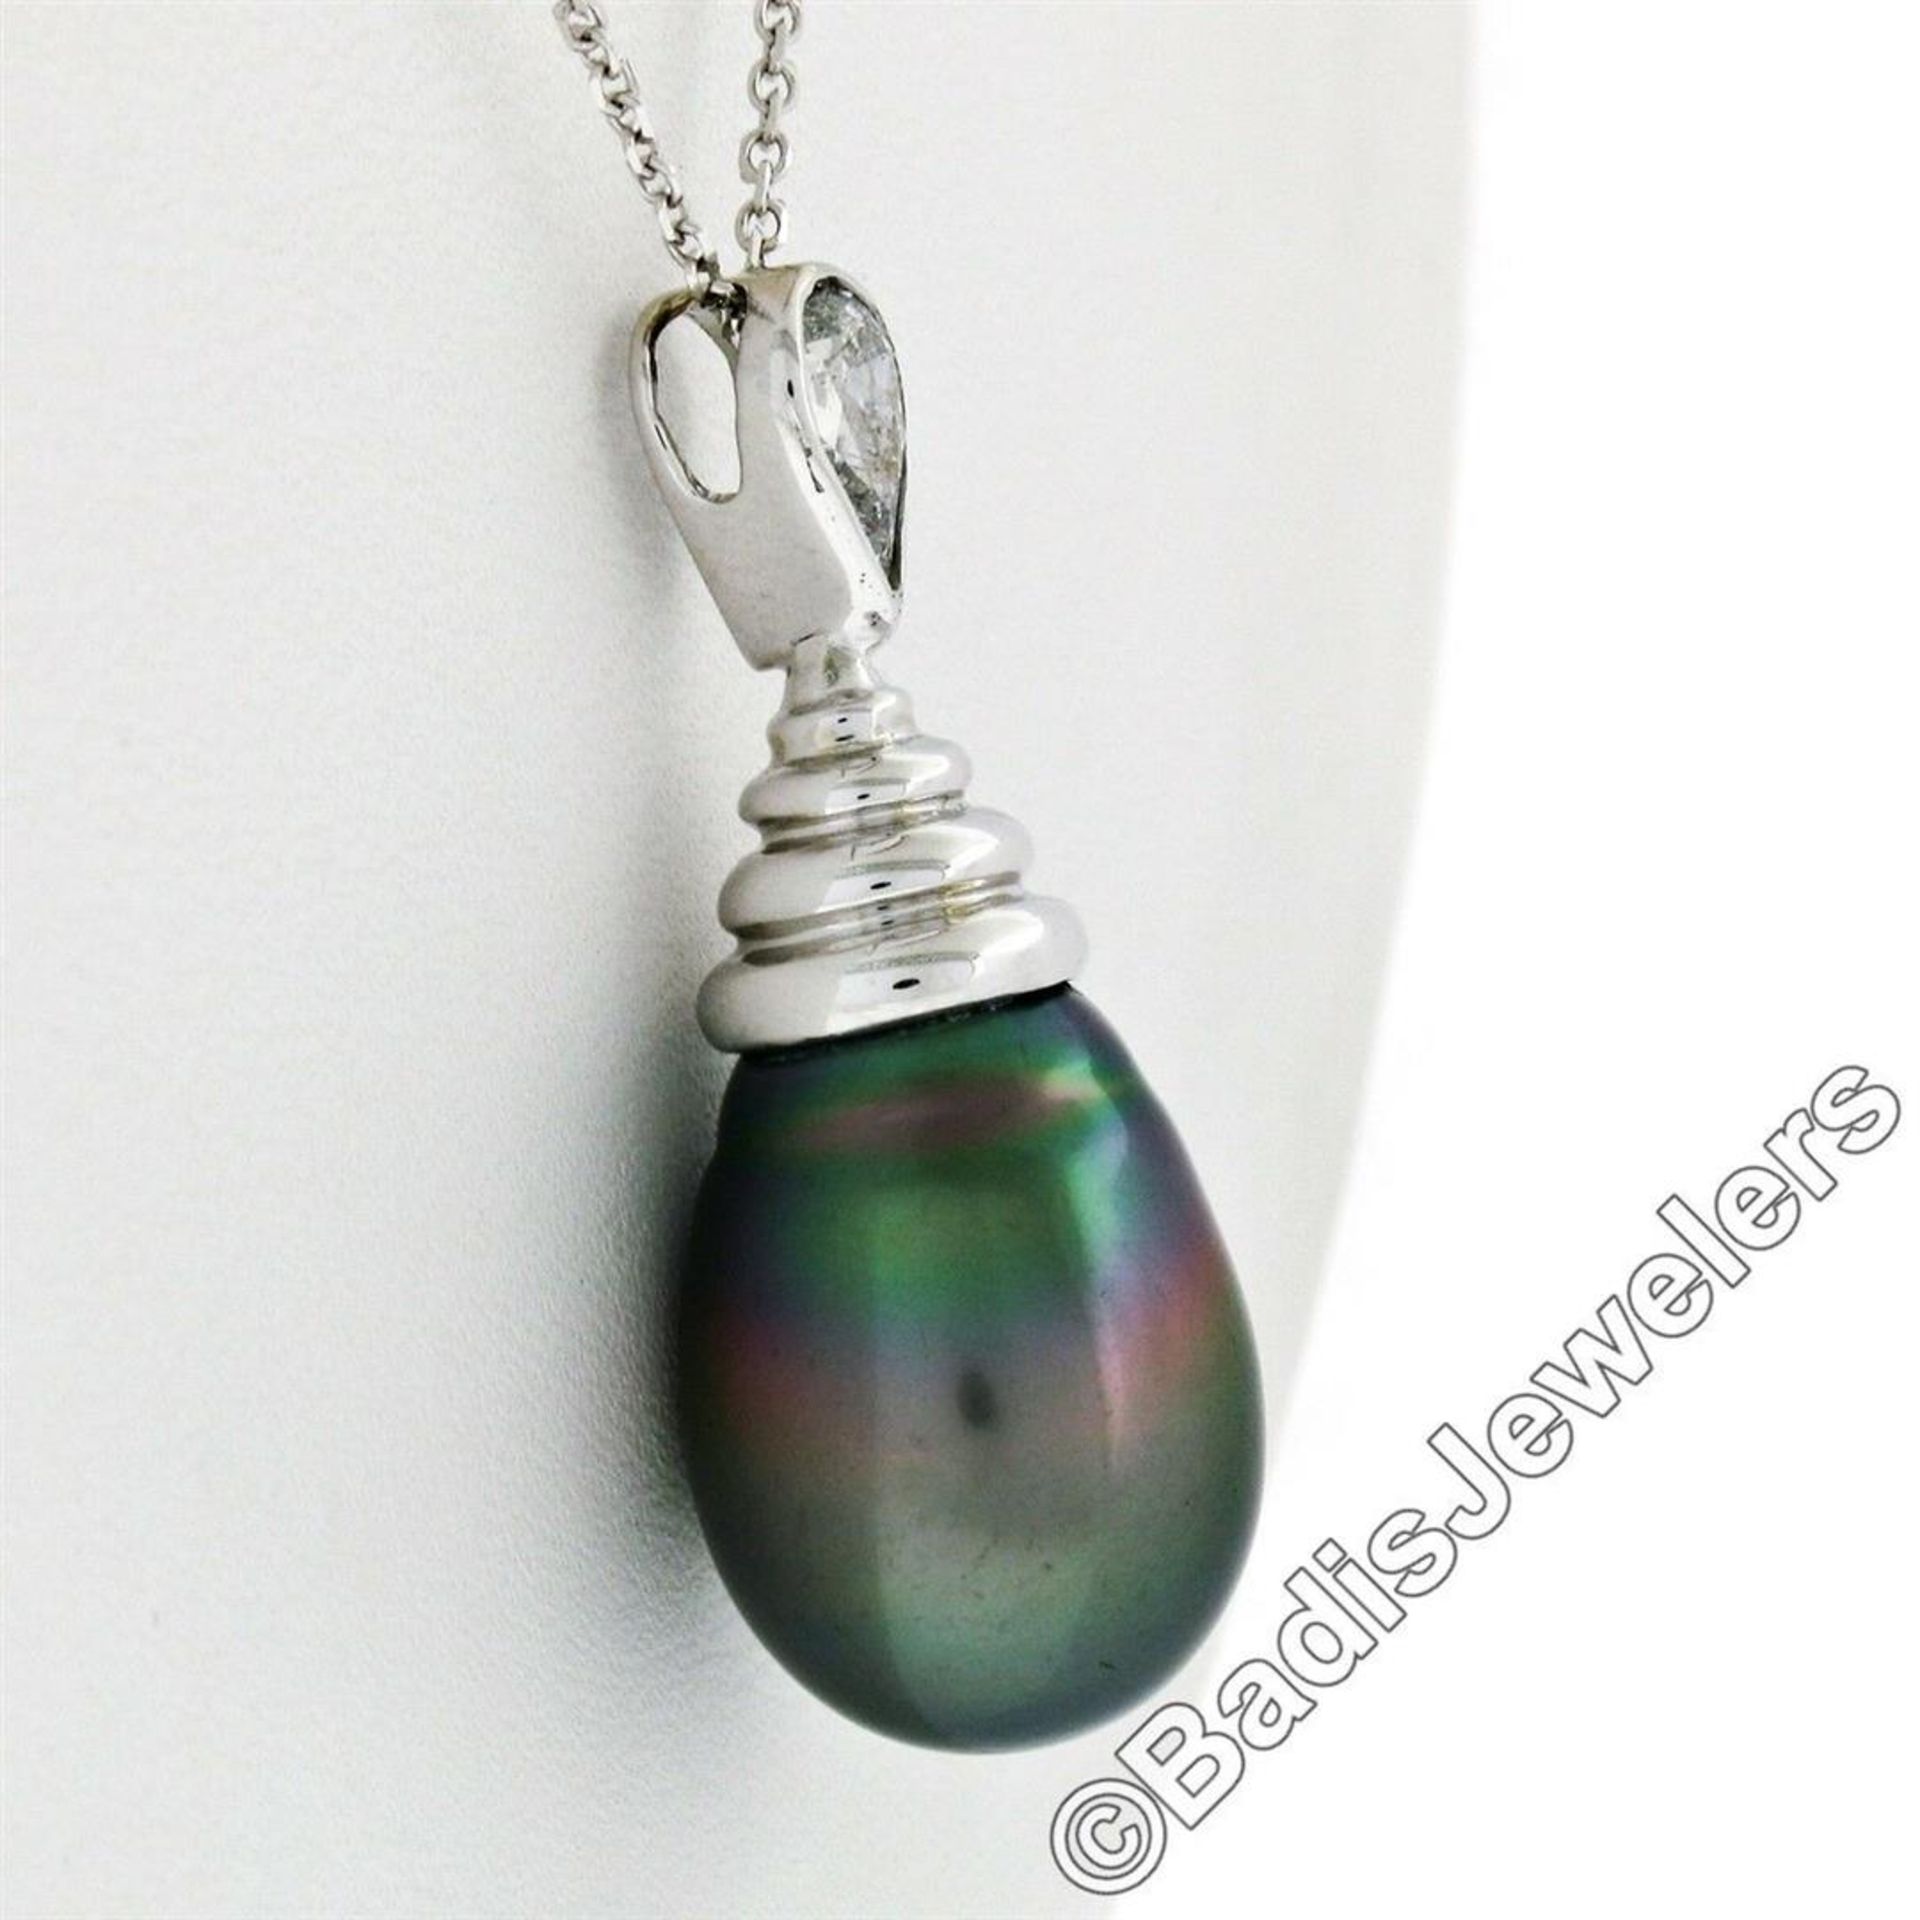 18kt White Gold Tahitian Black Pearl and 0.60 ct Diamond Pendant Necklace - Image 5 of 7